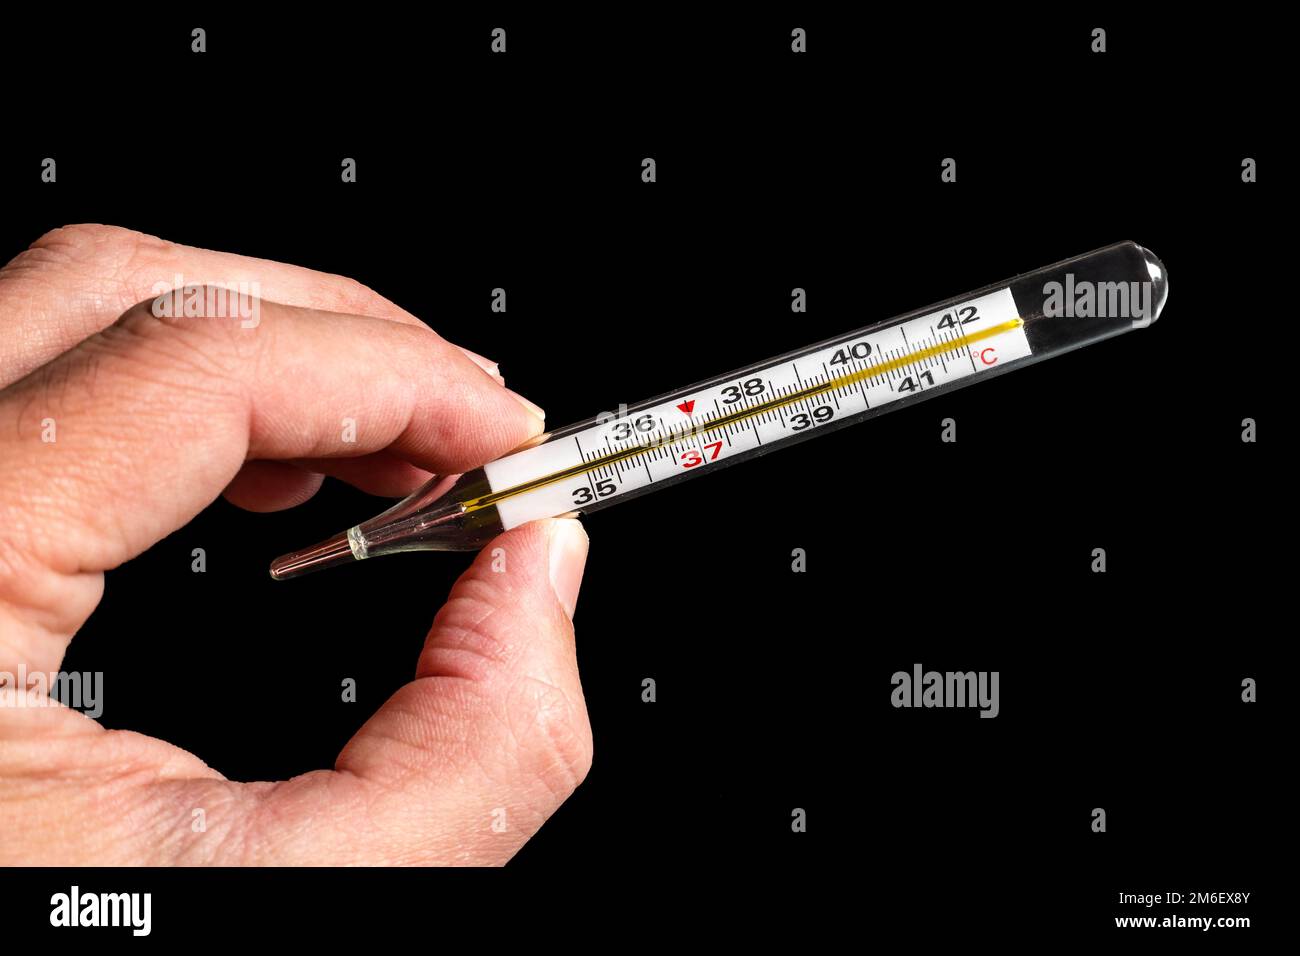 Hand holding a medical thermometer indicating fever against black background Stock Photo